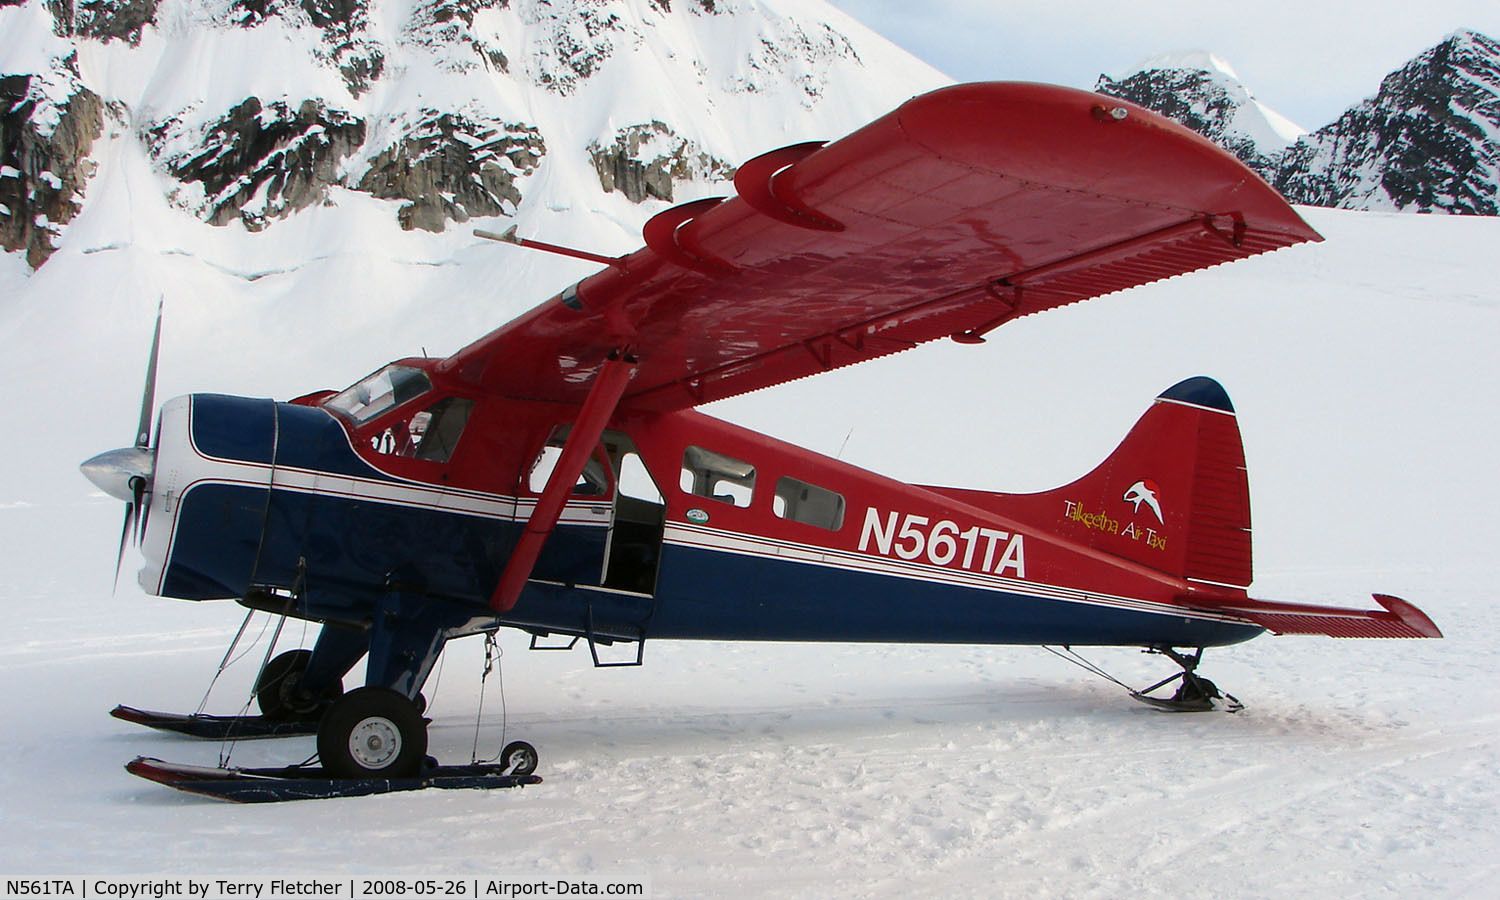 N561TA, De Havilland Canada DHC-2 Beaver Mk.1 C/N 581, I was fortunate enough to be aboard this Talkeetna Air Taxi when it landed on a Glacier in the shadow of Mt.McKinley in Alaska